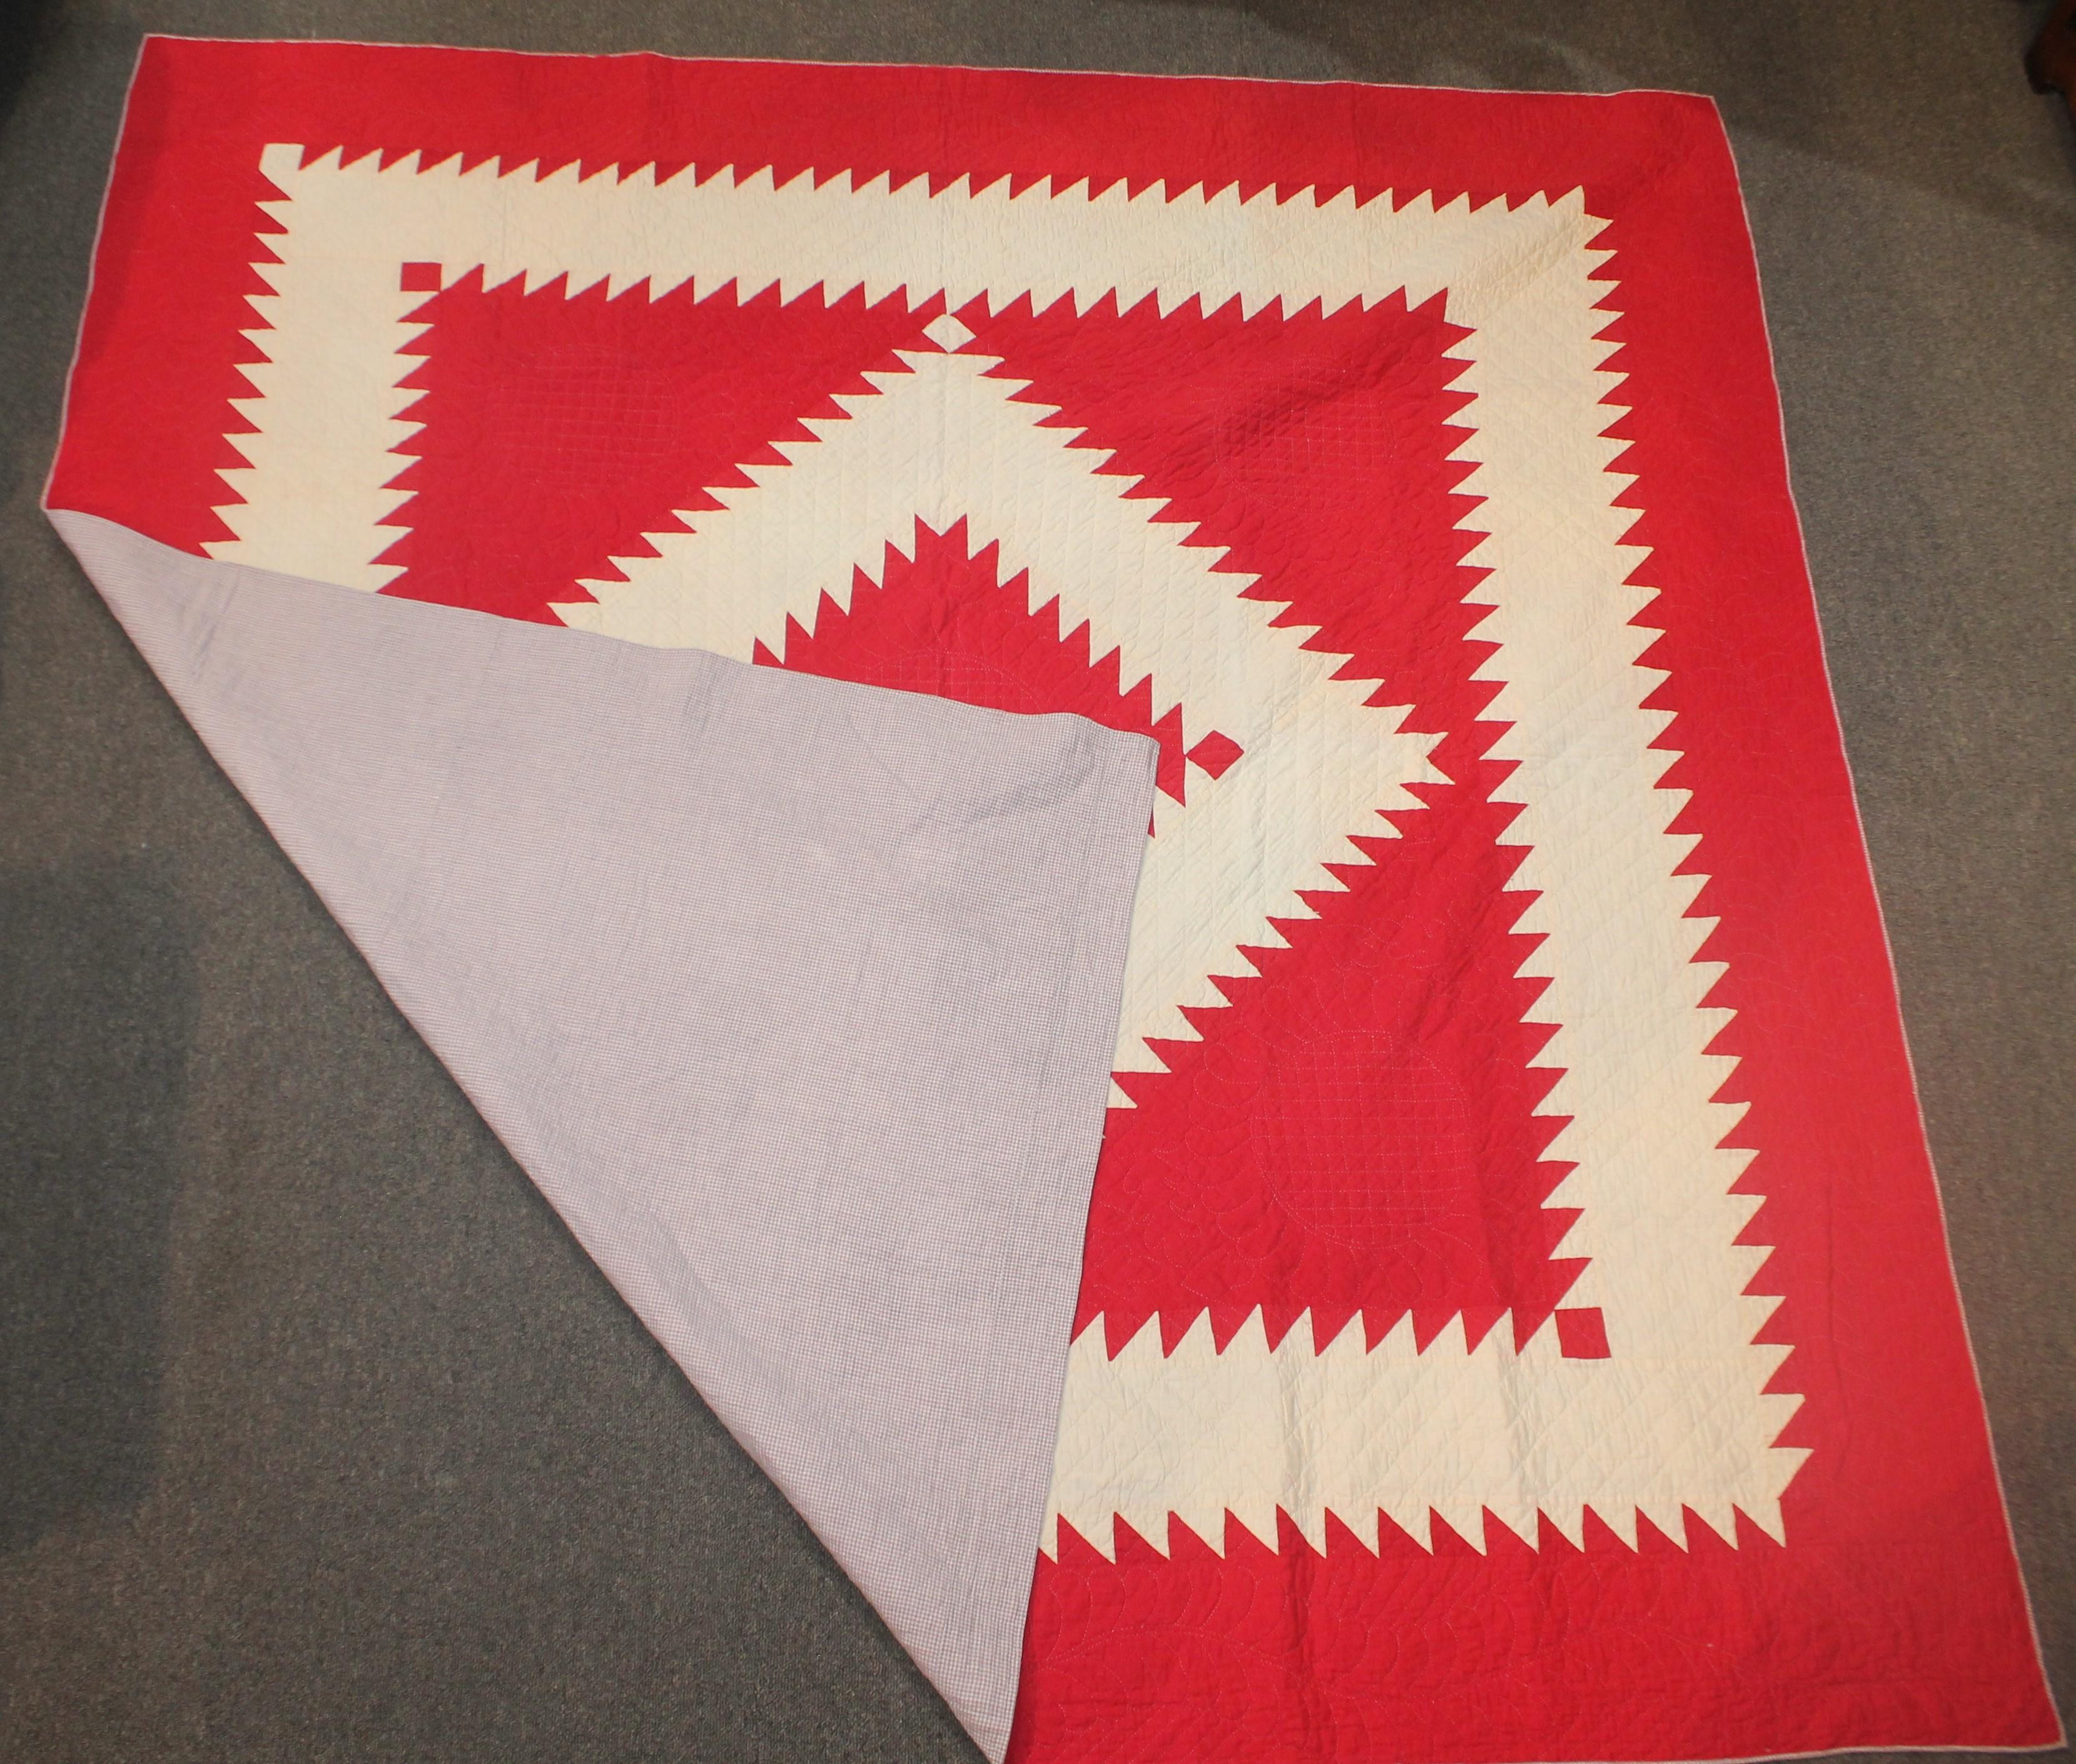 This fine 19th century red and white saw tooth diamond in a square is in fine condition. This is a Lancaster Country, Pennsylvania quilt is in fine condition and has wonderful quilting. The backing is in a homespun linen fabric.